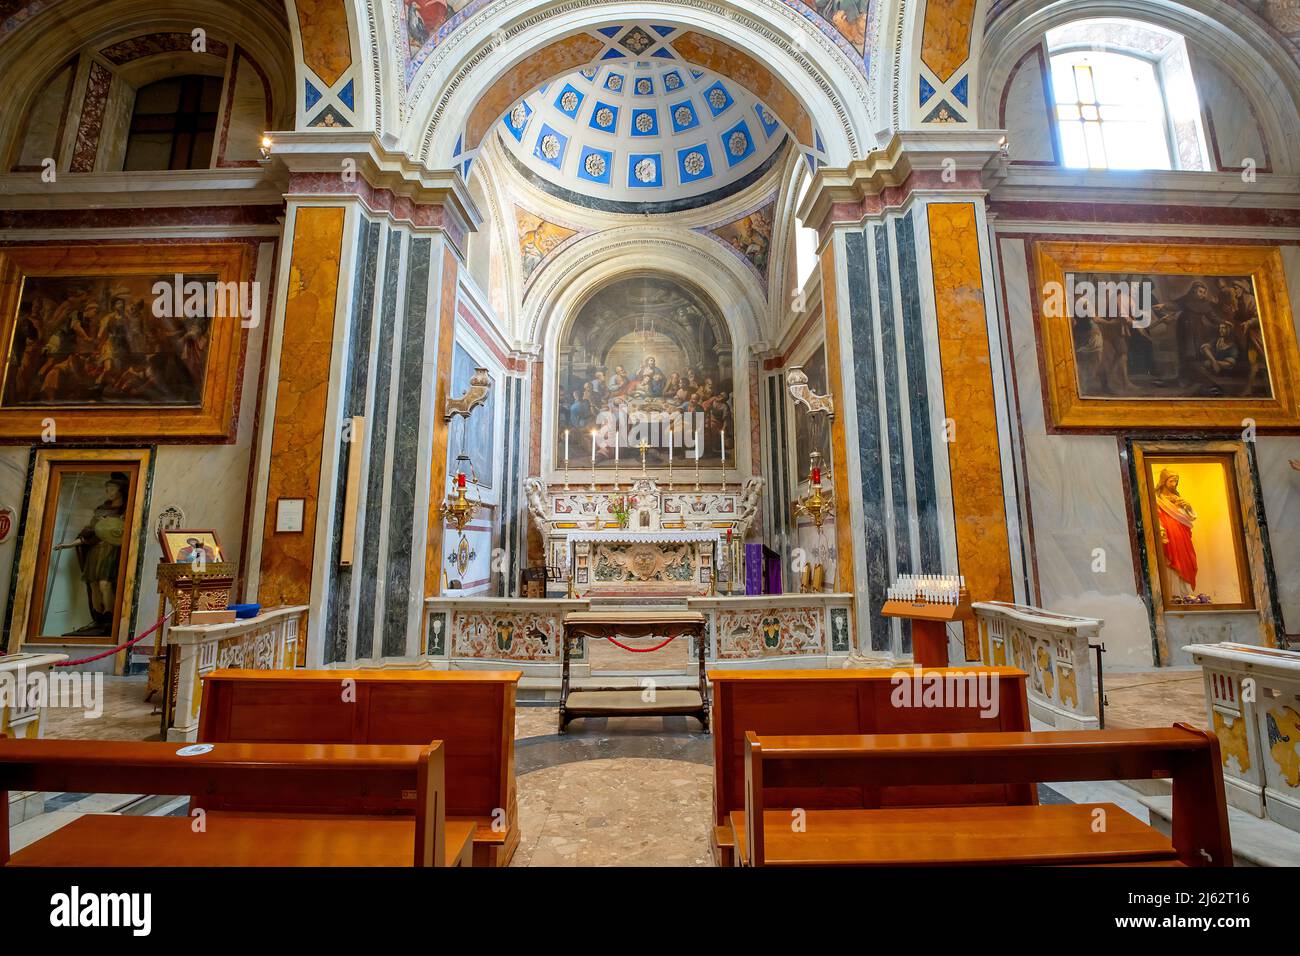 Chapel of the Blessed Sacrament, Cathedral in Brindisi. Piazza Duomo near Archiological museum in Brindisi, Apulia (Puglia), Italy. Stock Photo